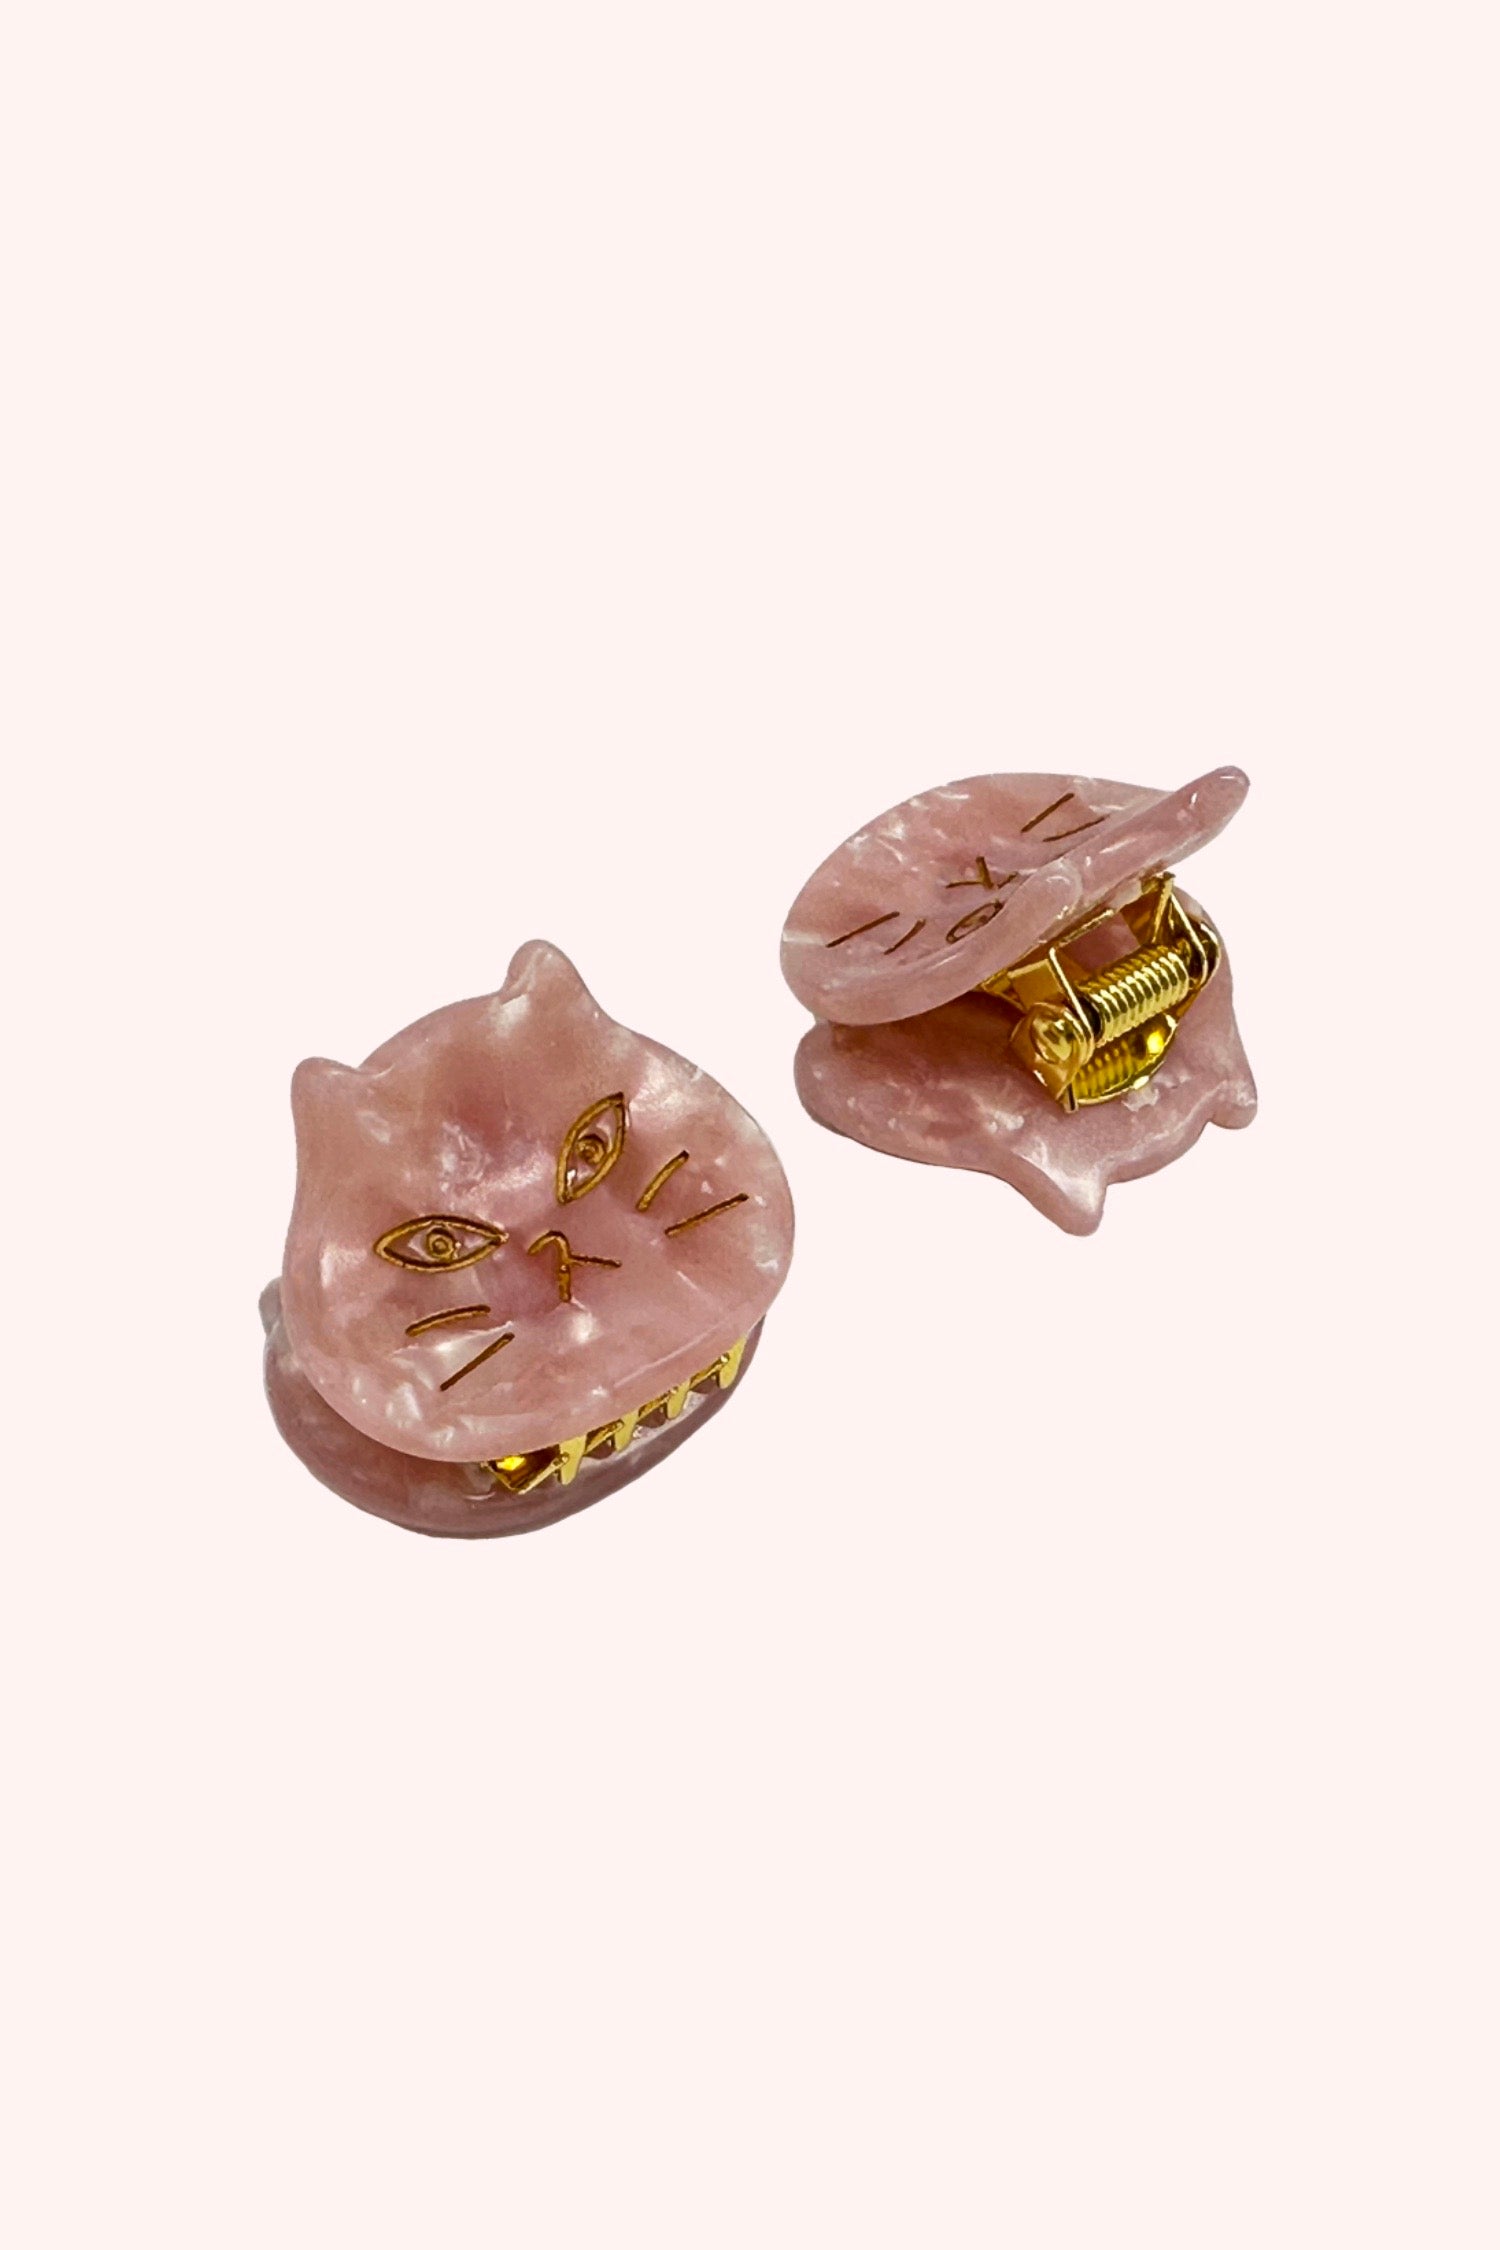 Cat's Meow Jaw Clip Pair, pink, cat head on a golden jaw clip to add some fun to your hairstyle